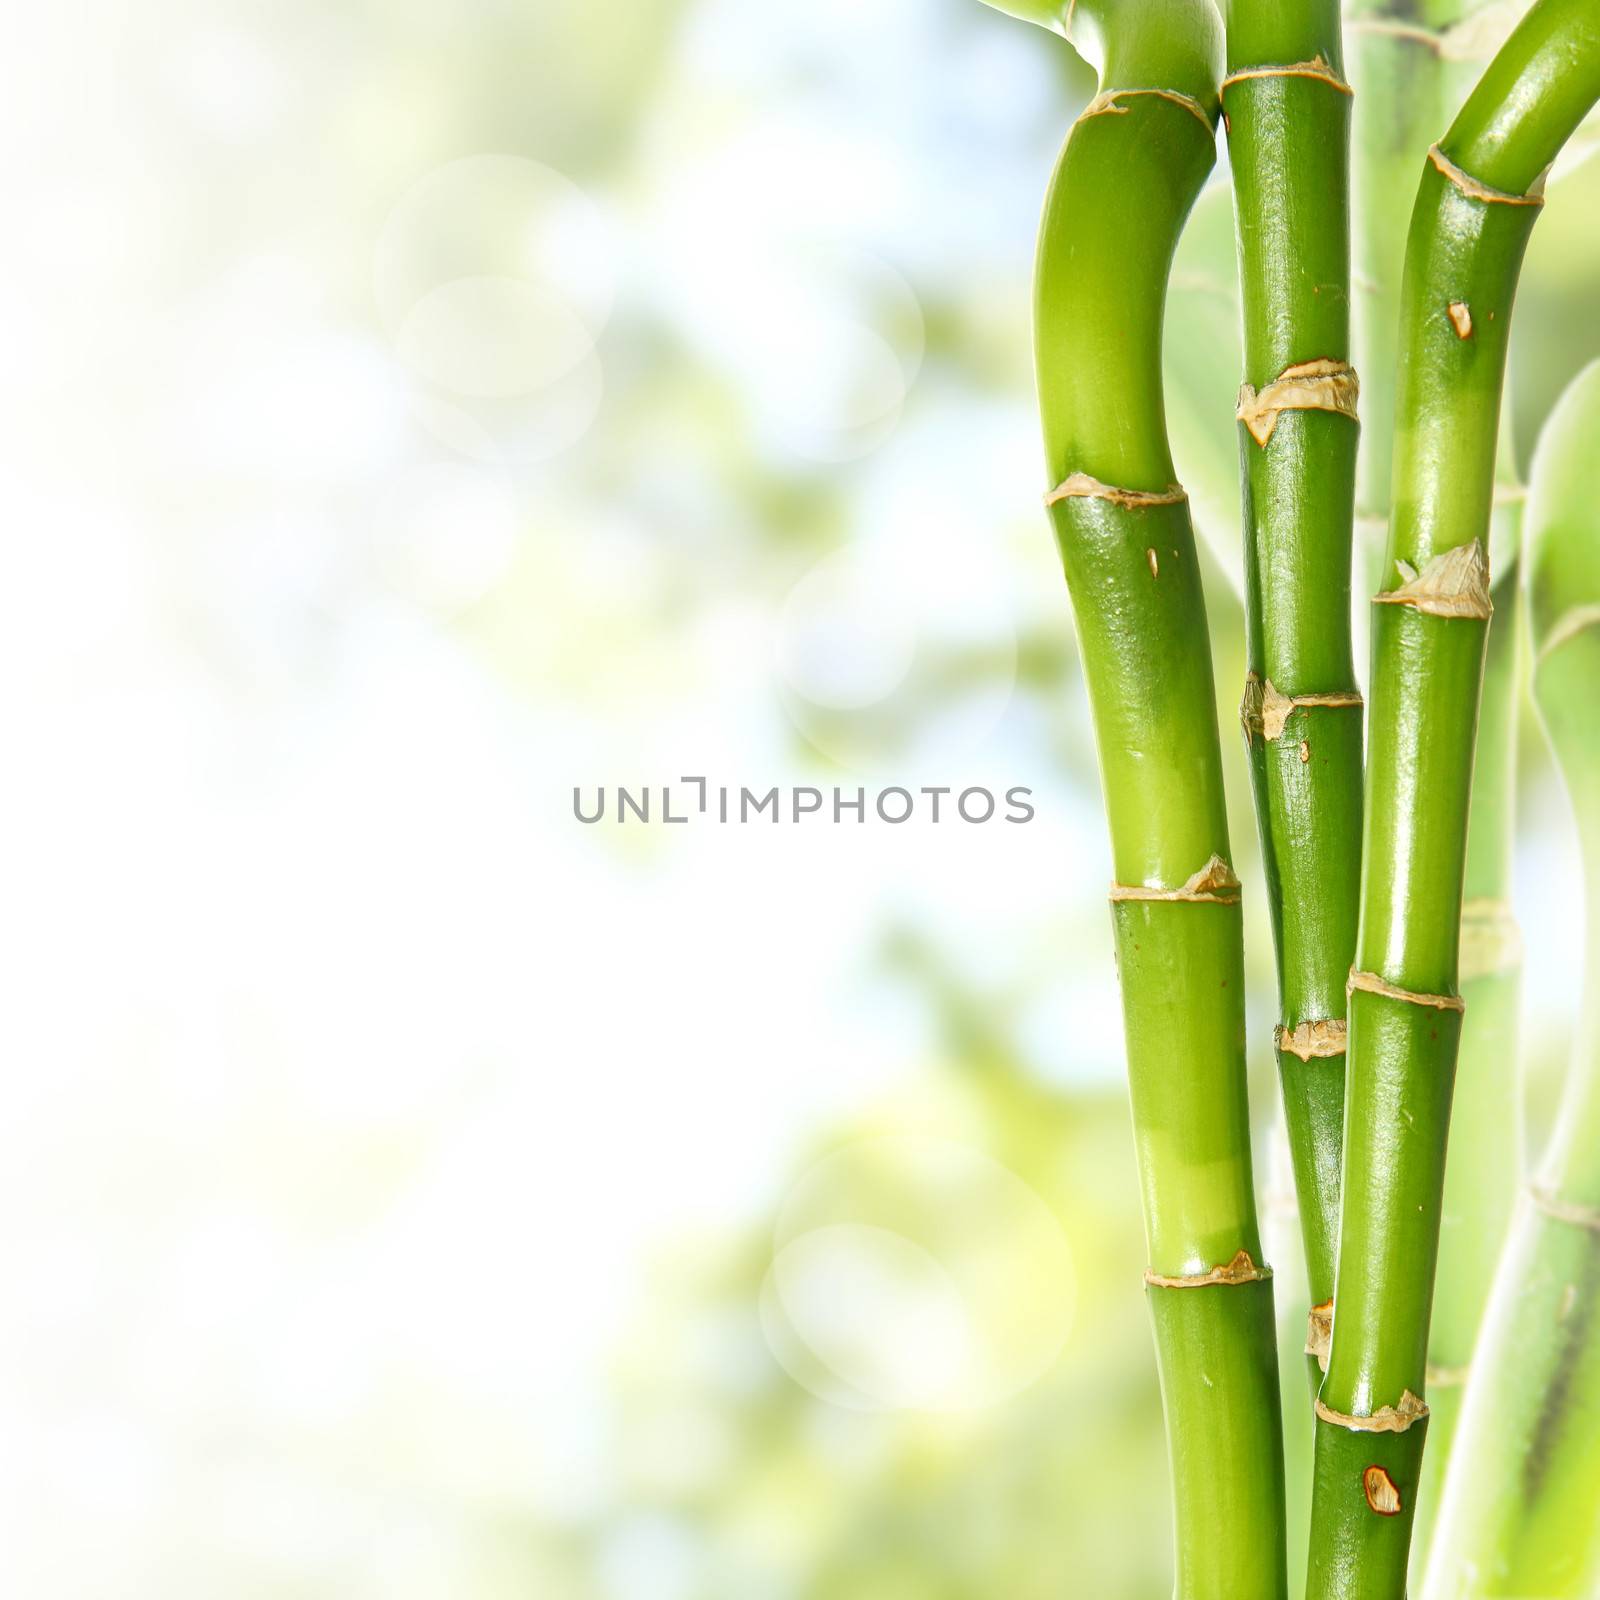 Bamboo by dynamicfoto